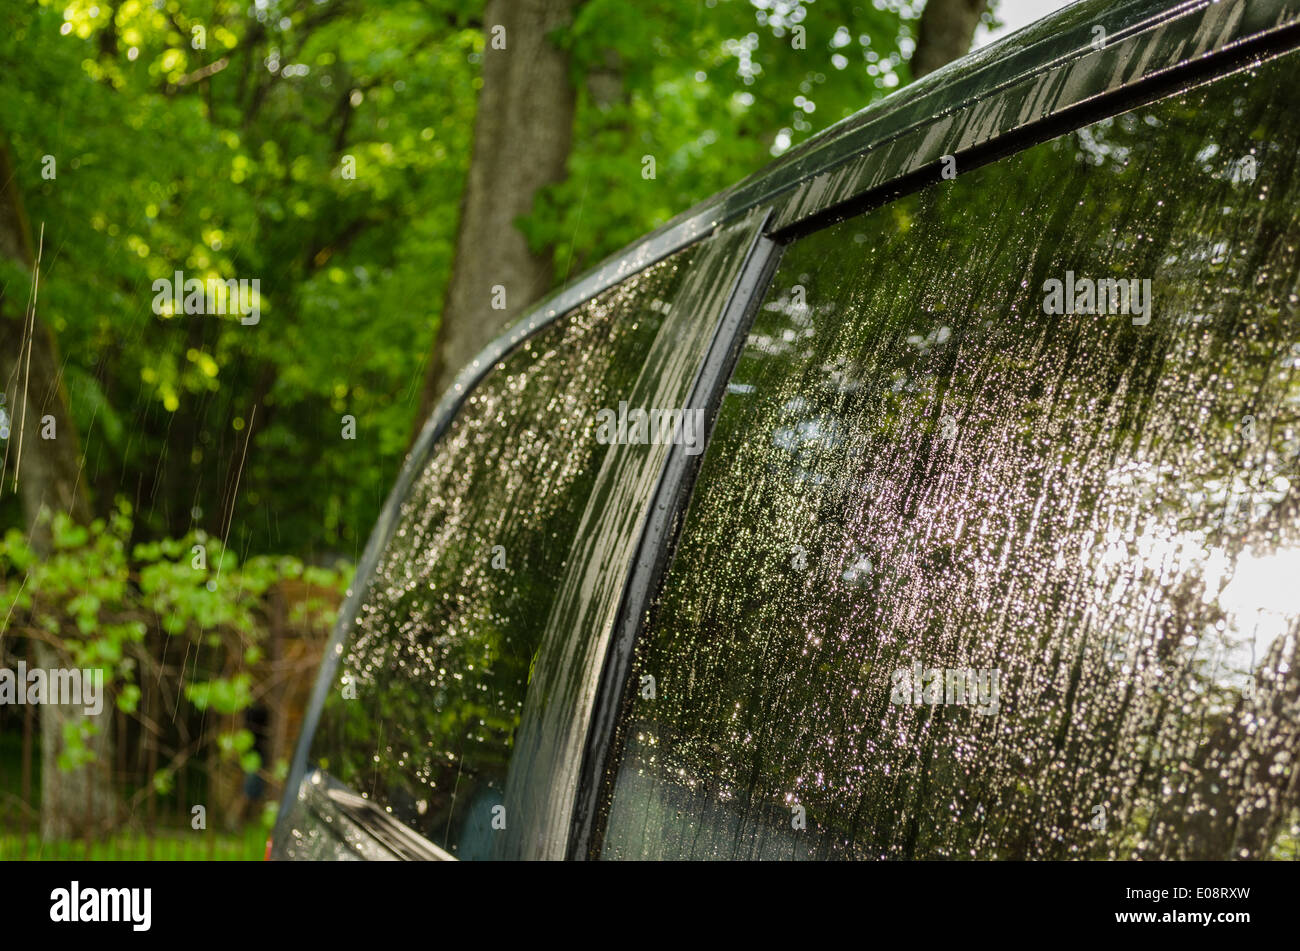 Strong rain water drops fall and splash on car roof and windows. Stock Photo